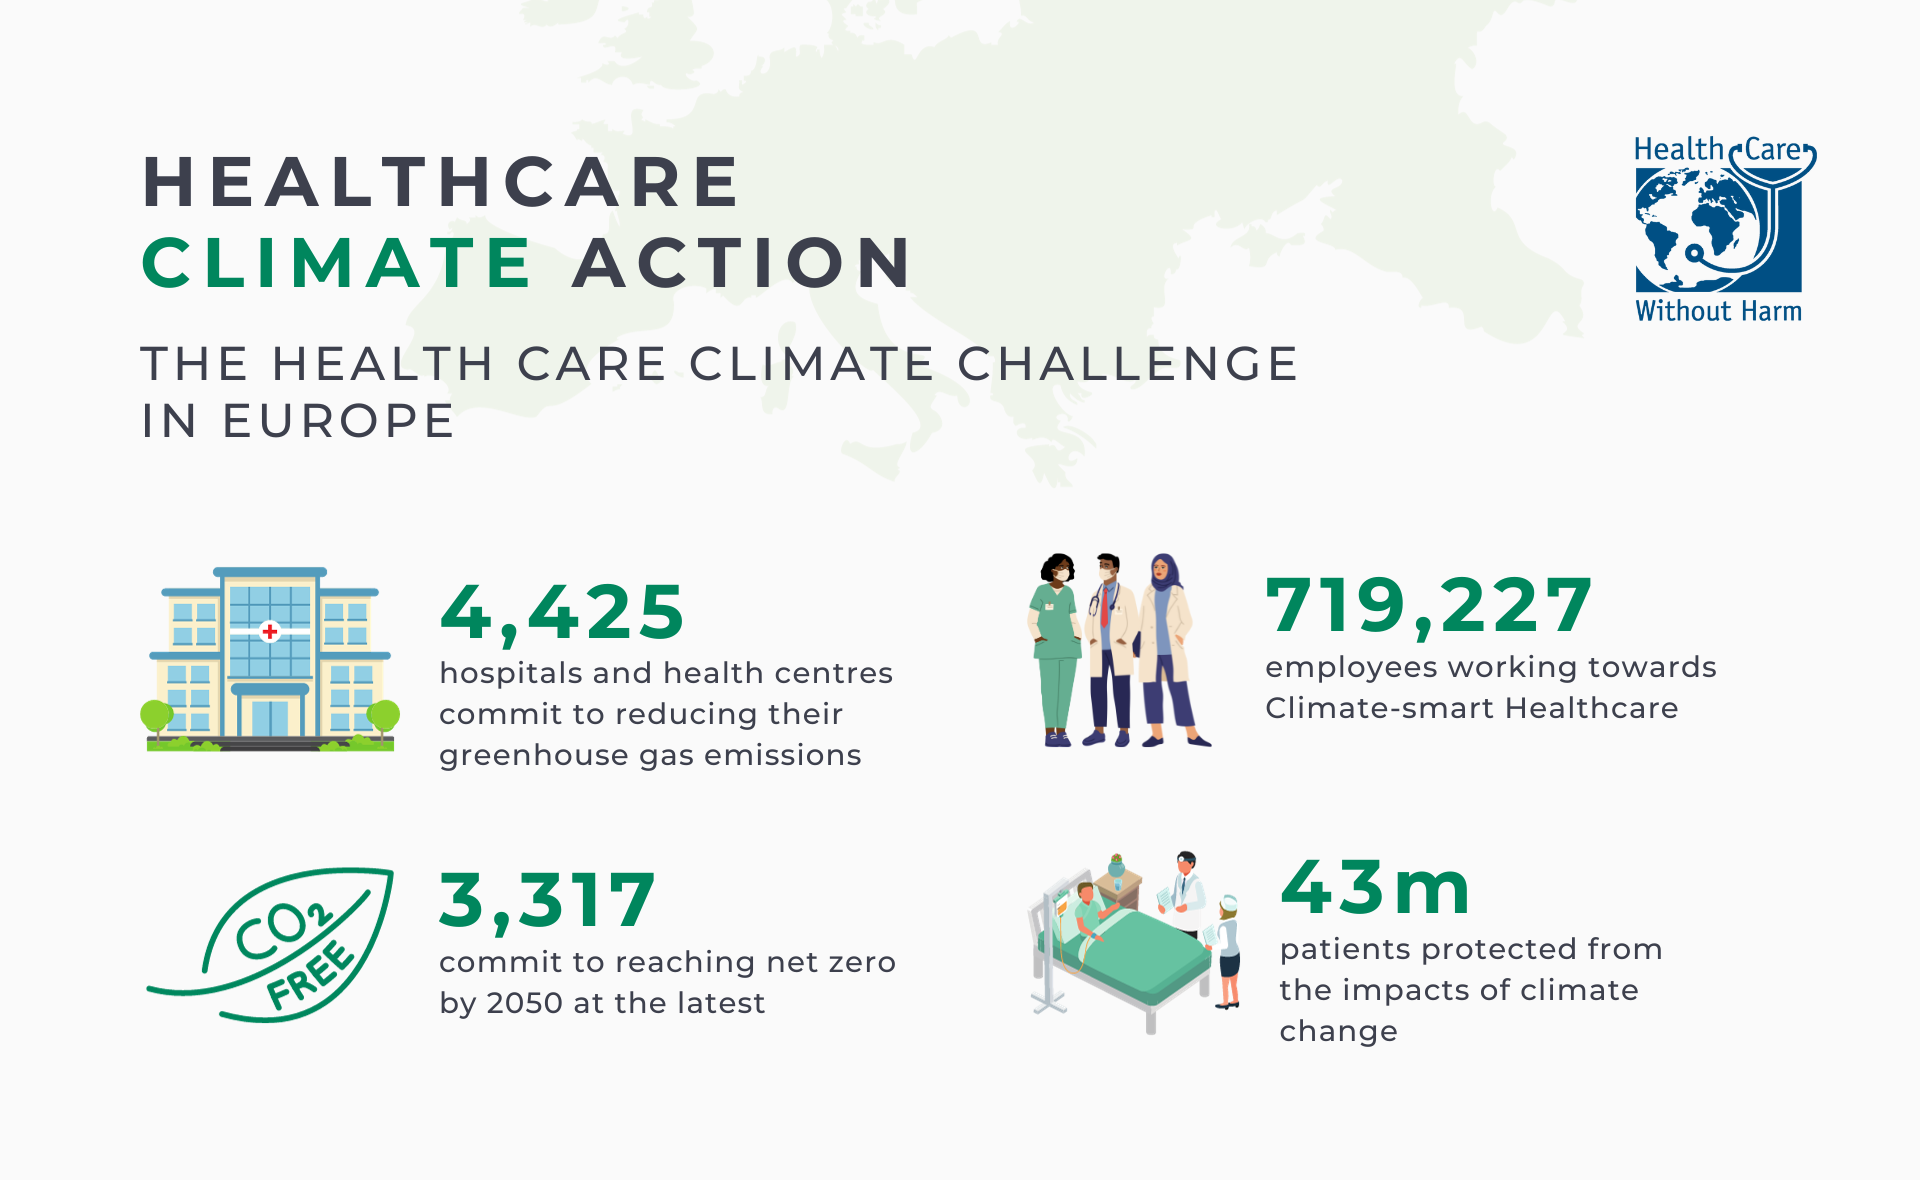 Key figures of healthcare climate action by Health Care Climate Challenge participants in Europe